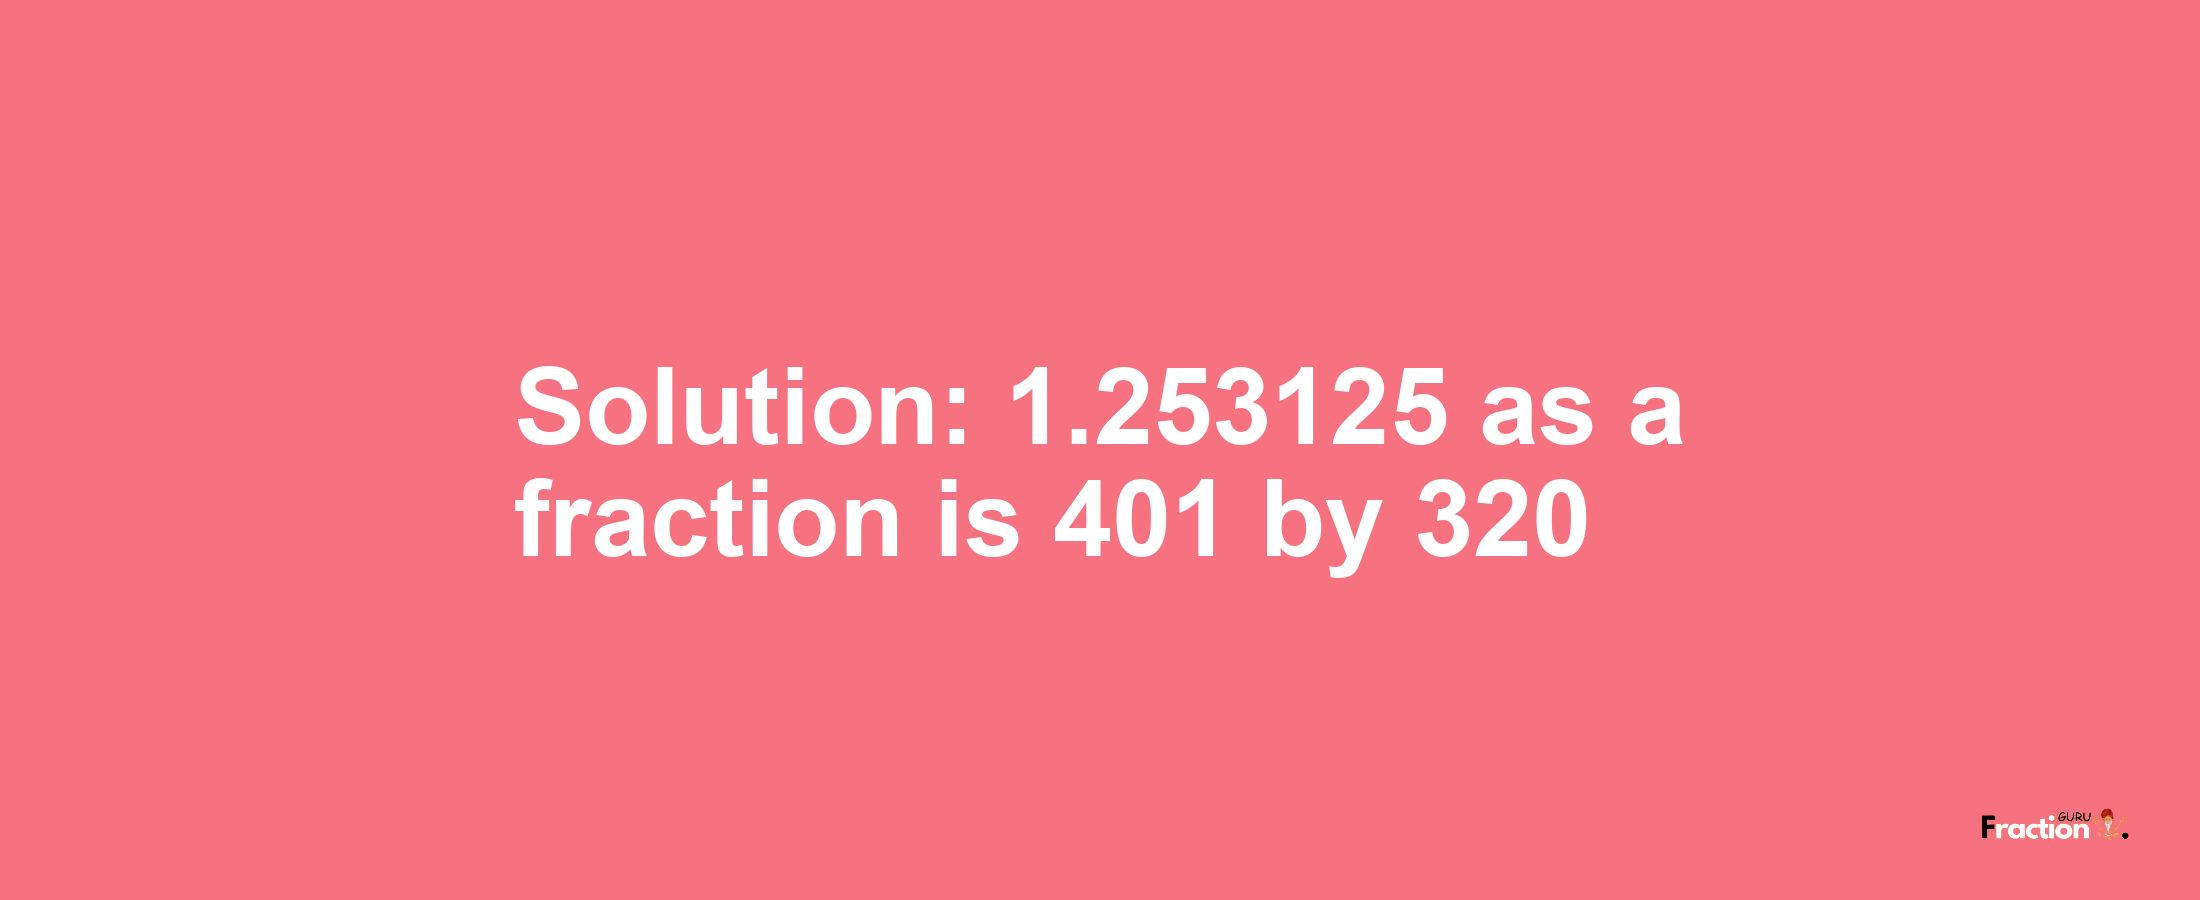 Solution:1.253125 as a fraction is 401/320